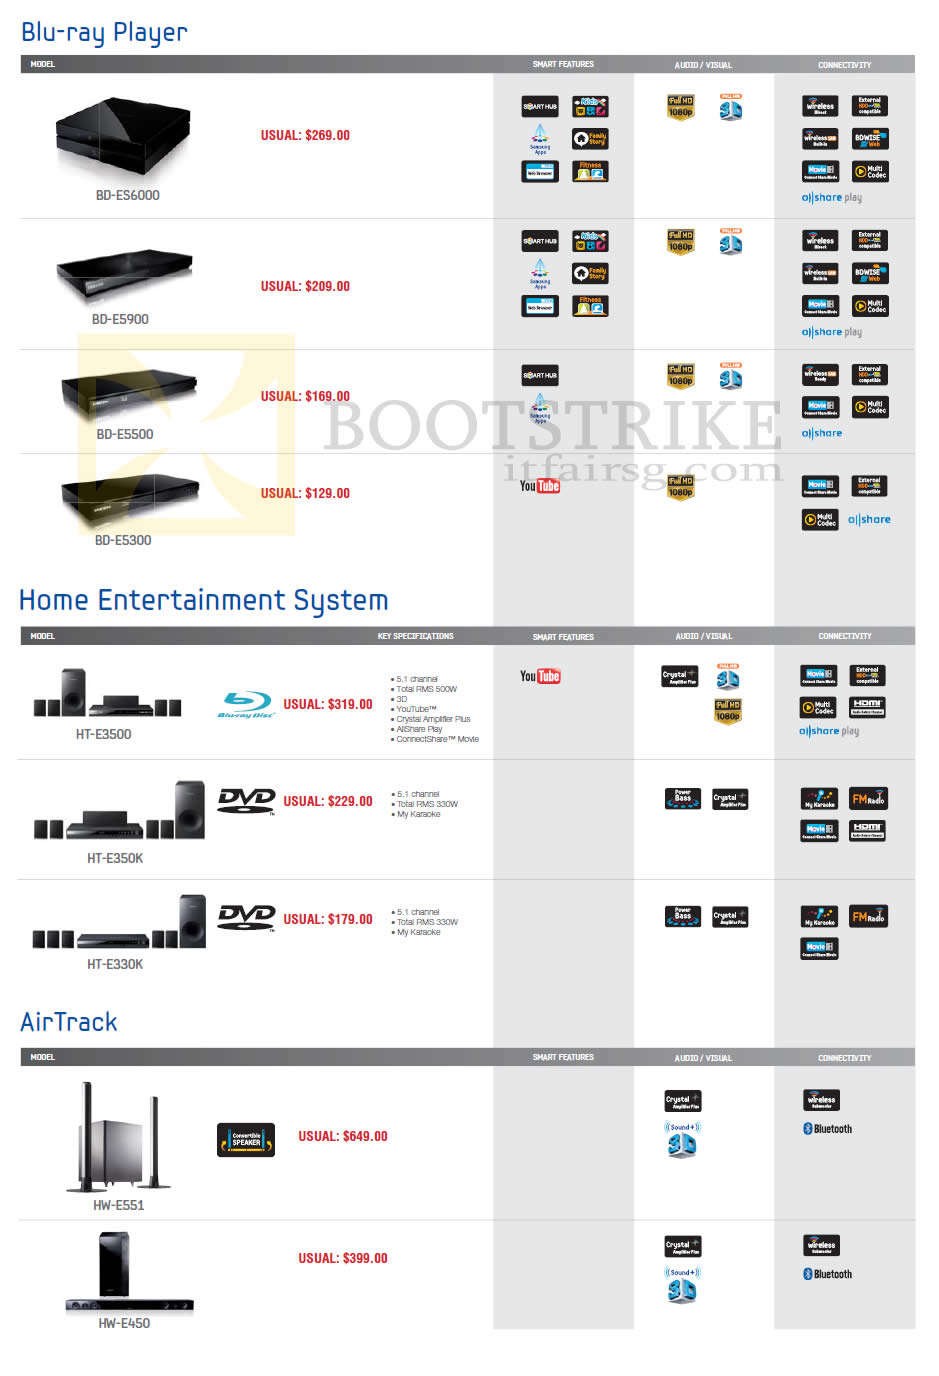 SITEX 2012 price list image brochure of Samsung Gain City Blu-Ray Player, Home Entertainment System, AirTrack